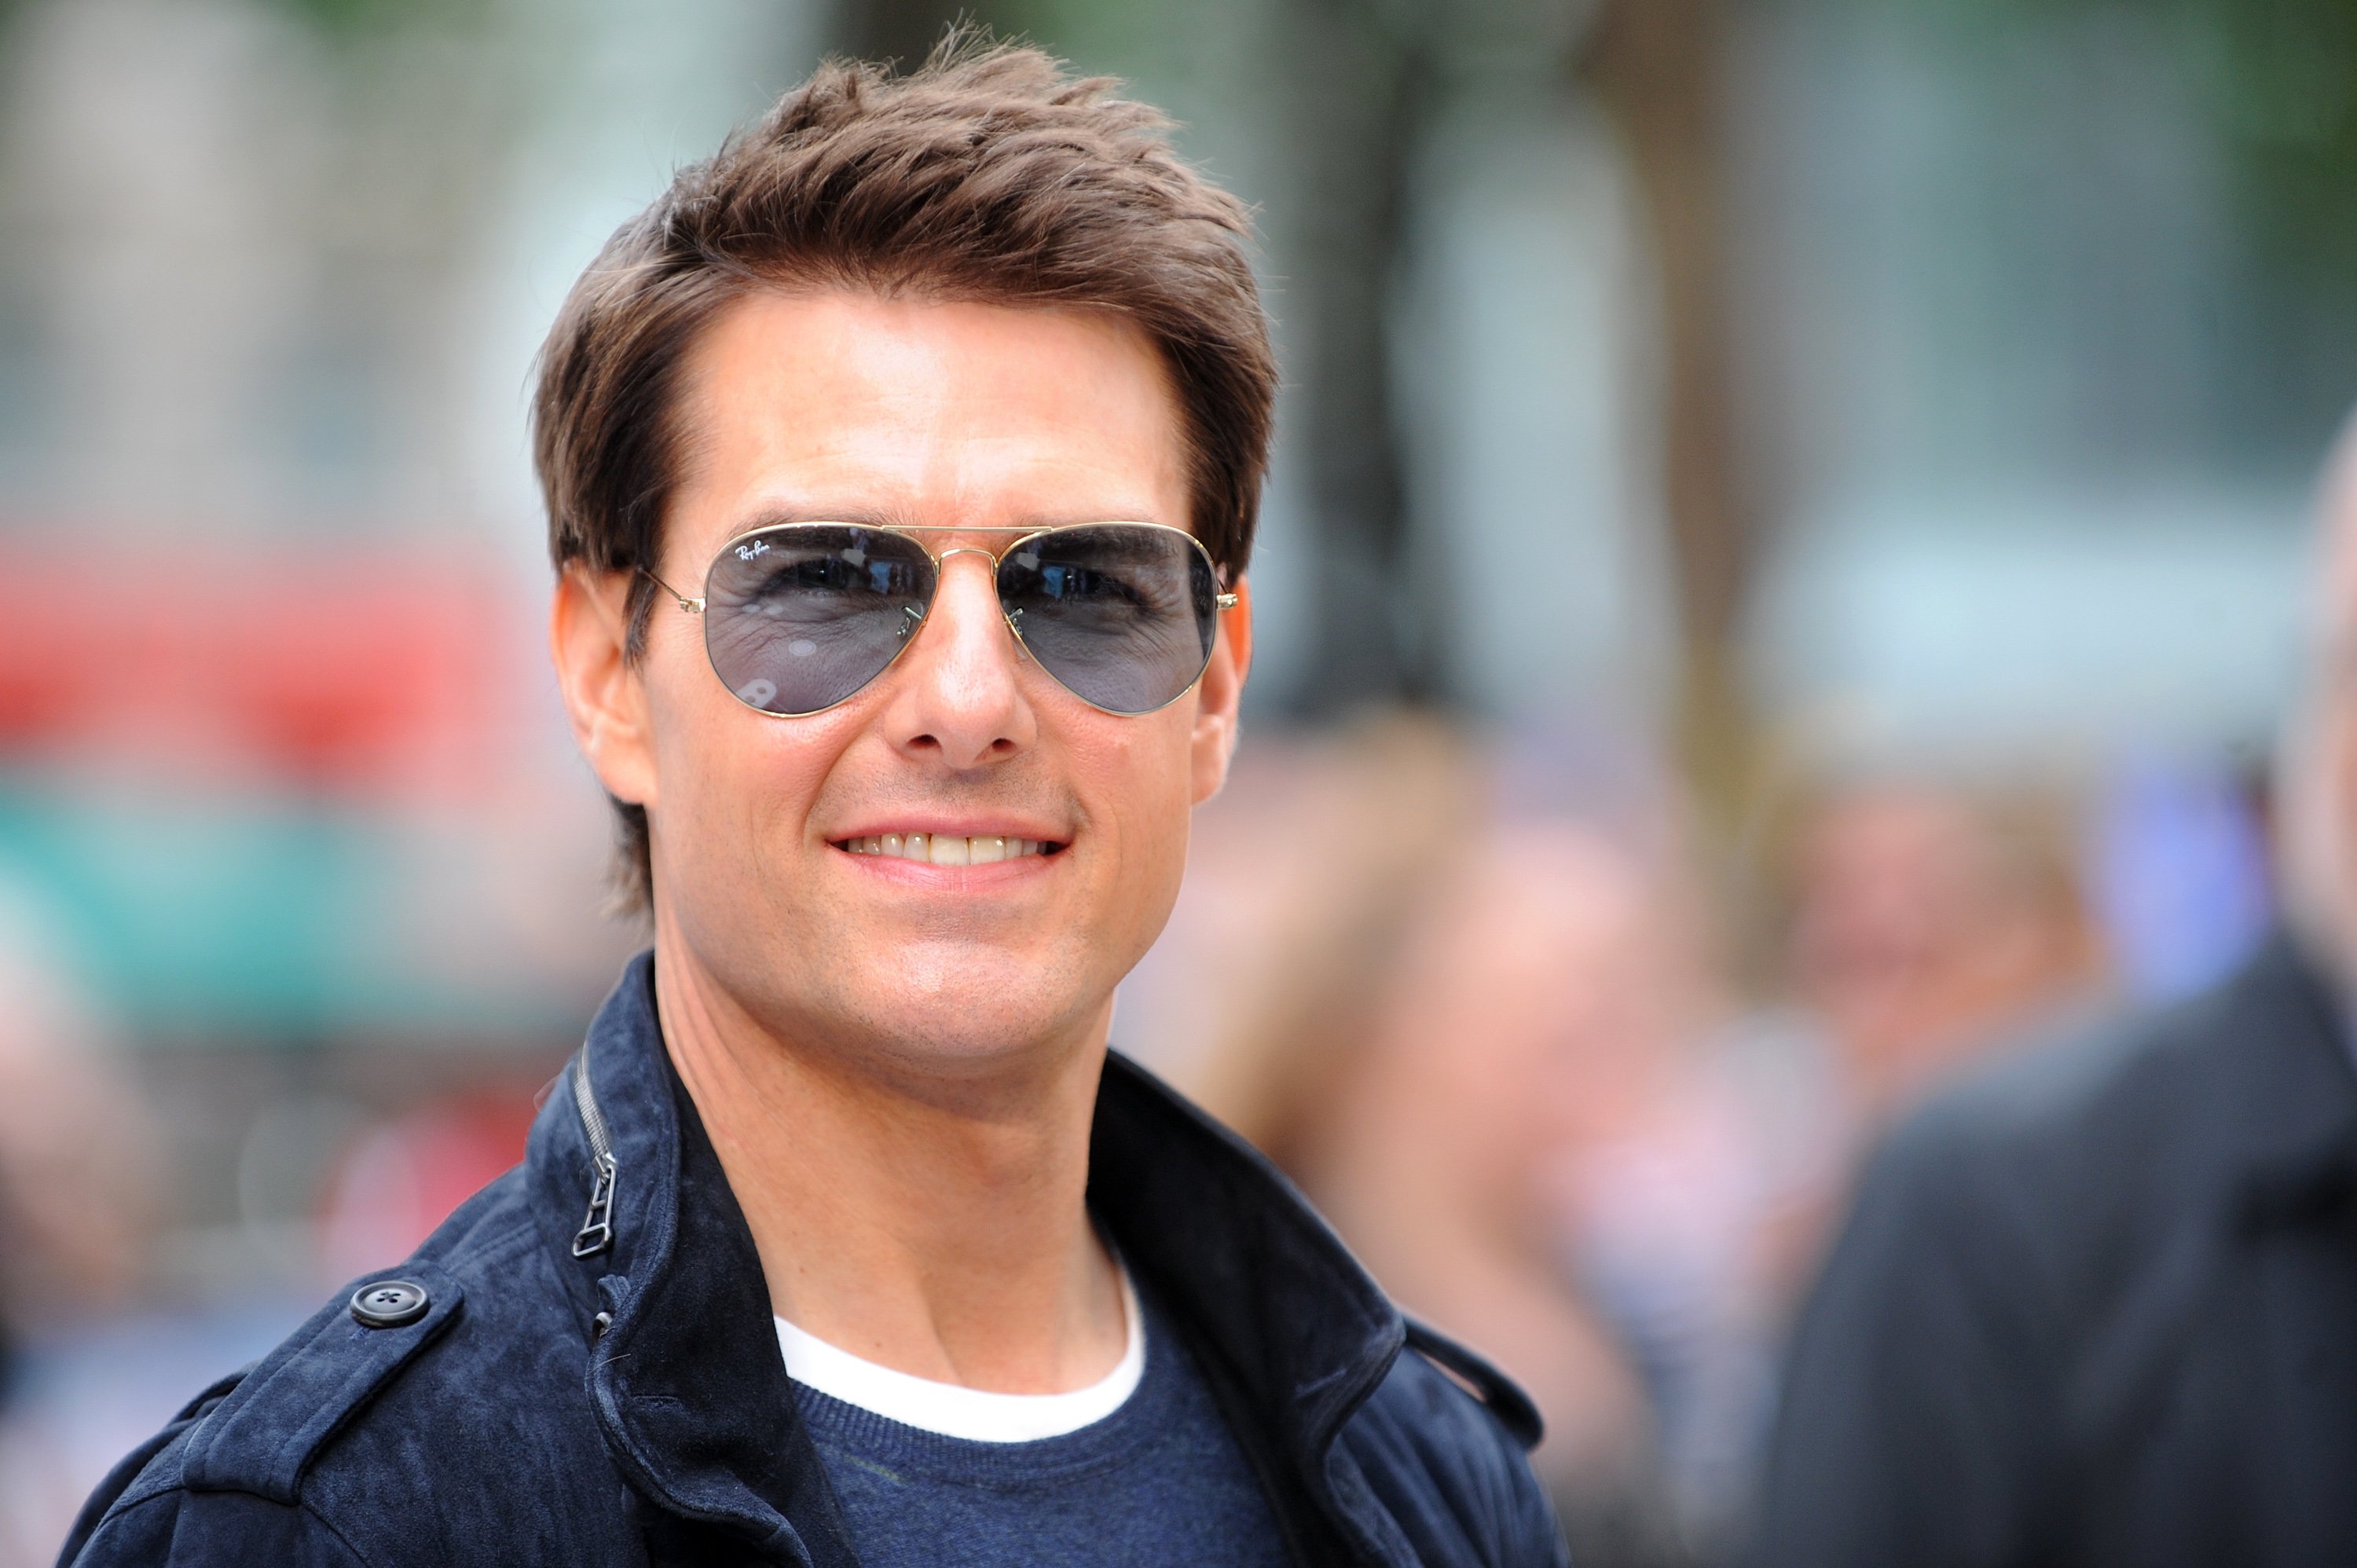 Tom Cruise attends the European premiere of "Rock Of Ages" at Odeon Leicester Square on June 10, 2012. | Photo: GettyImages